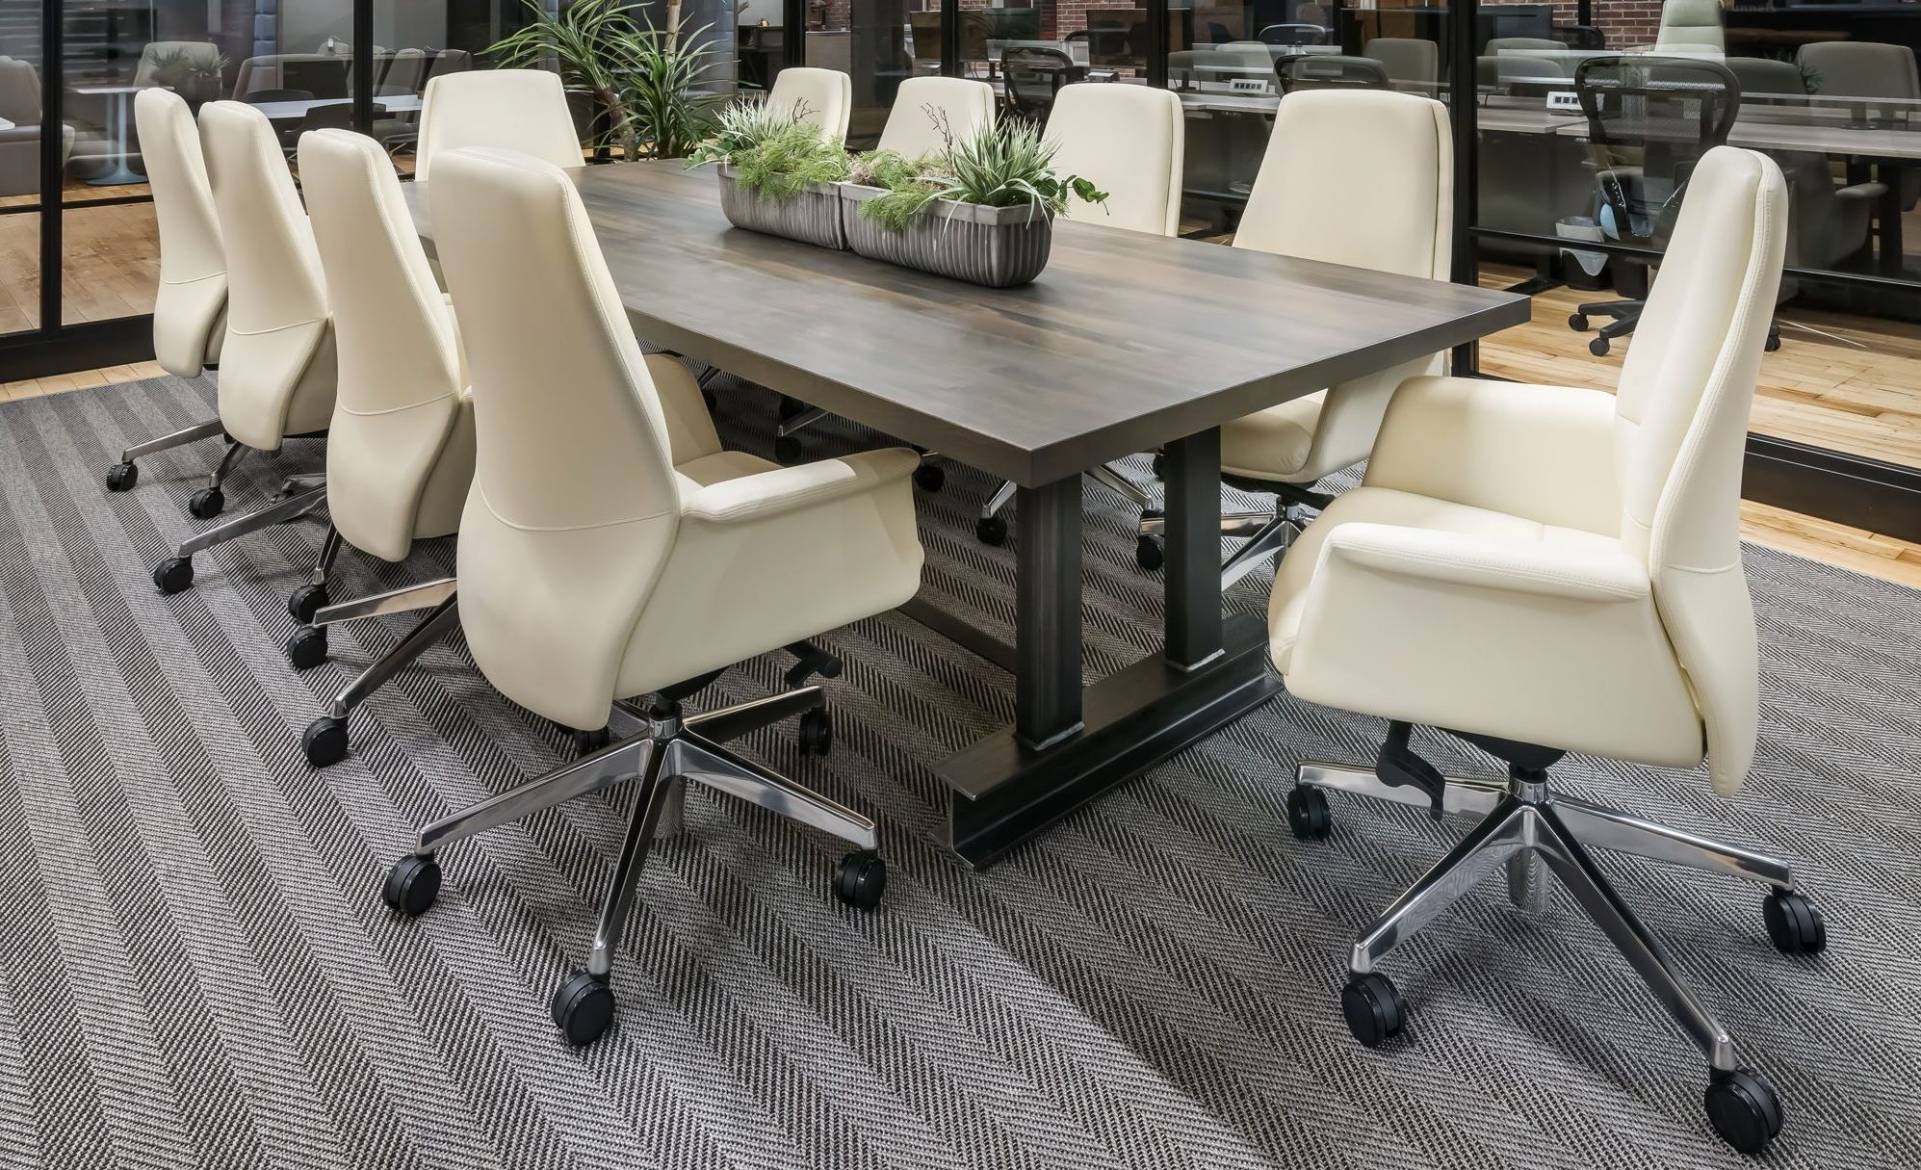 Stylish conference room with table and off-white Italian leather chairs